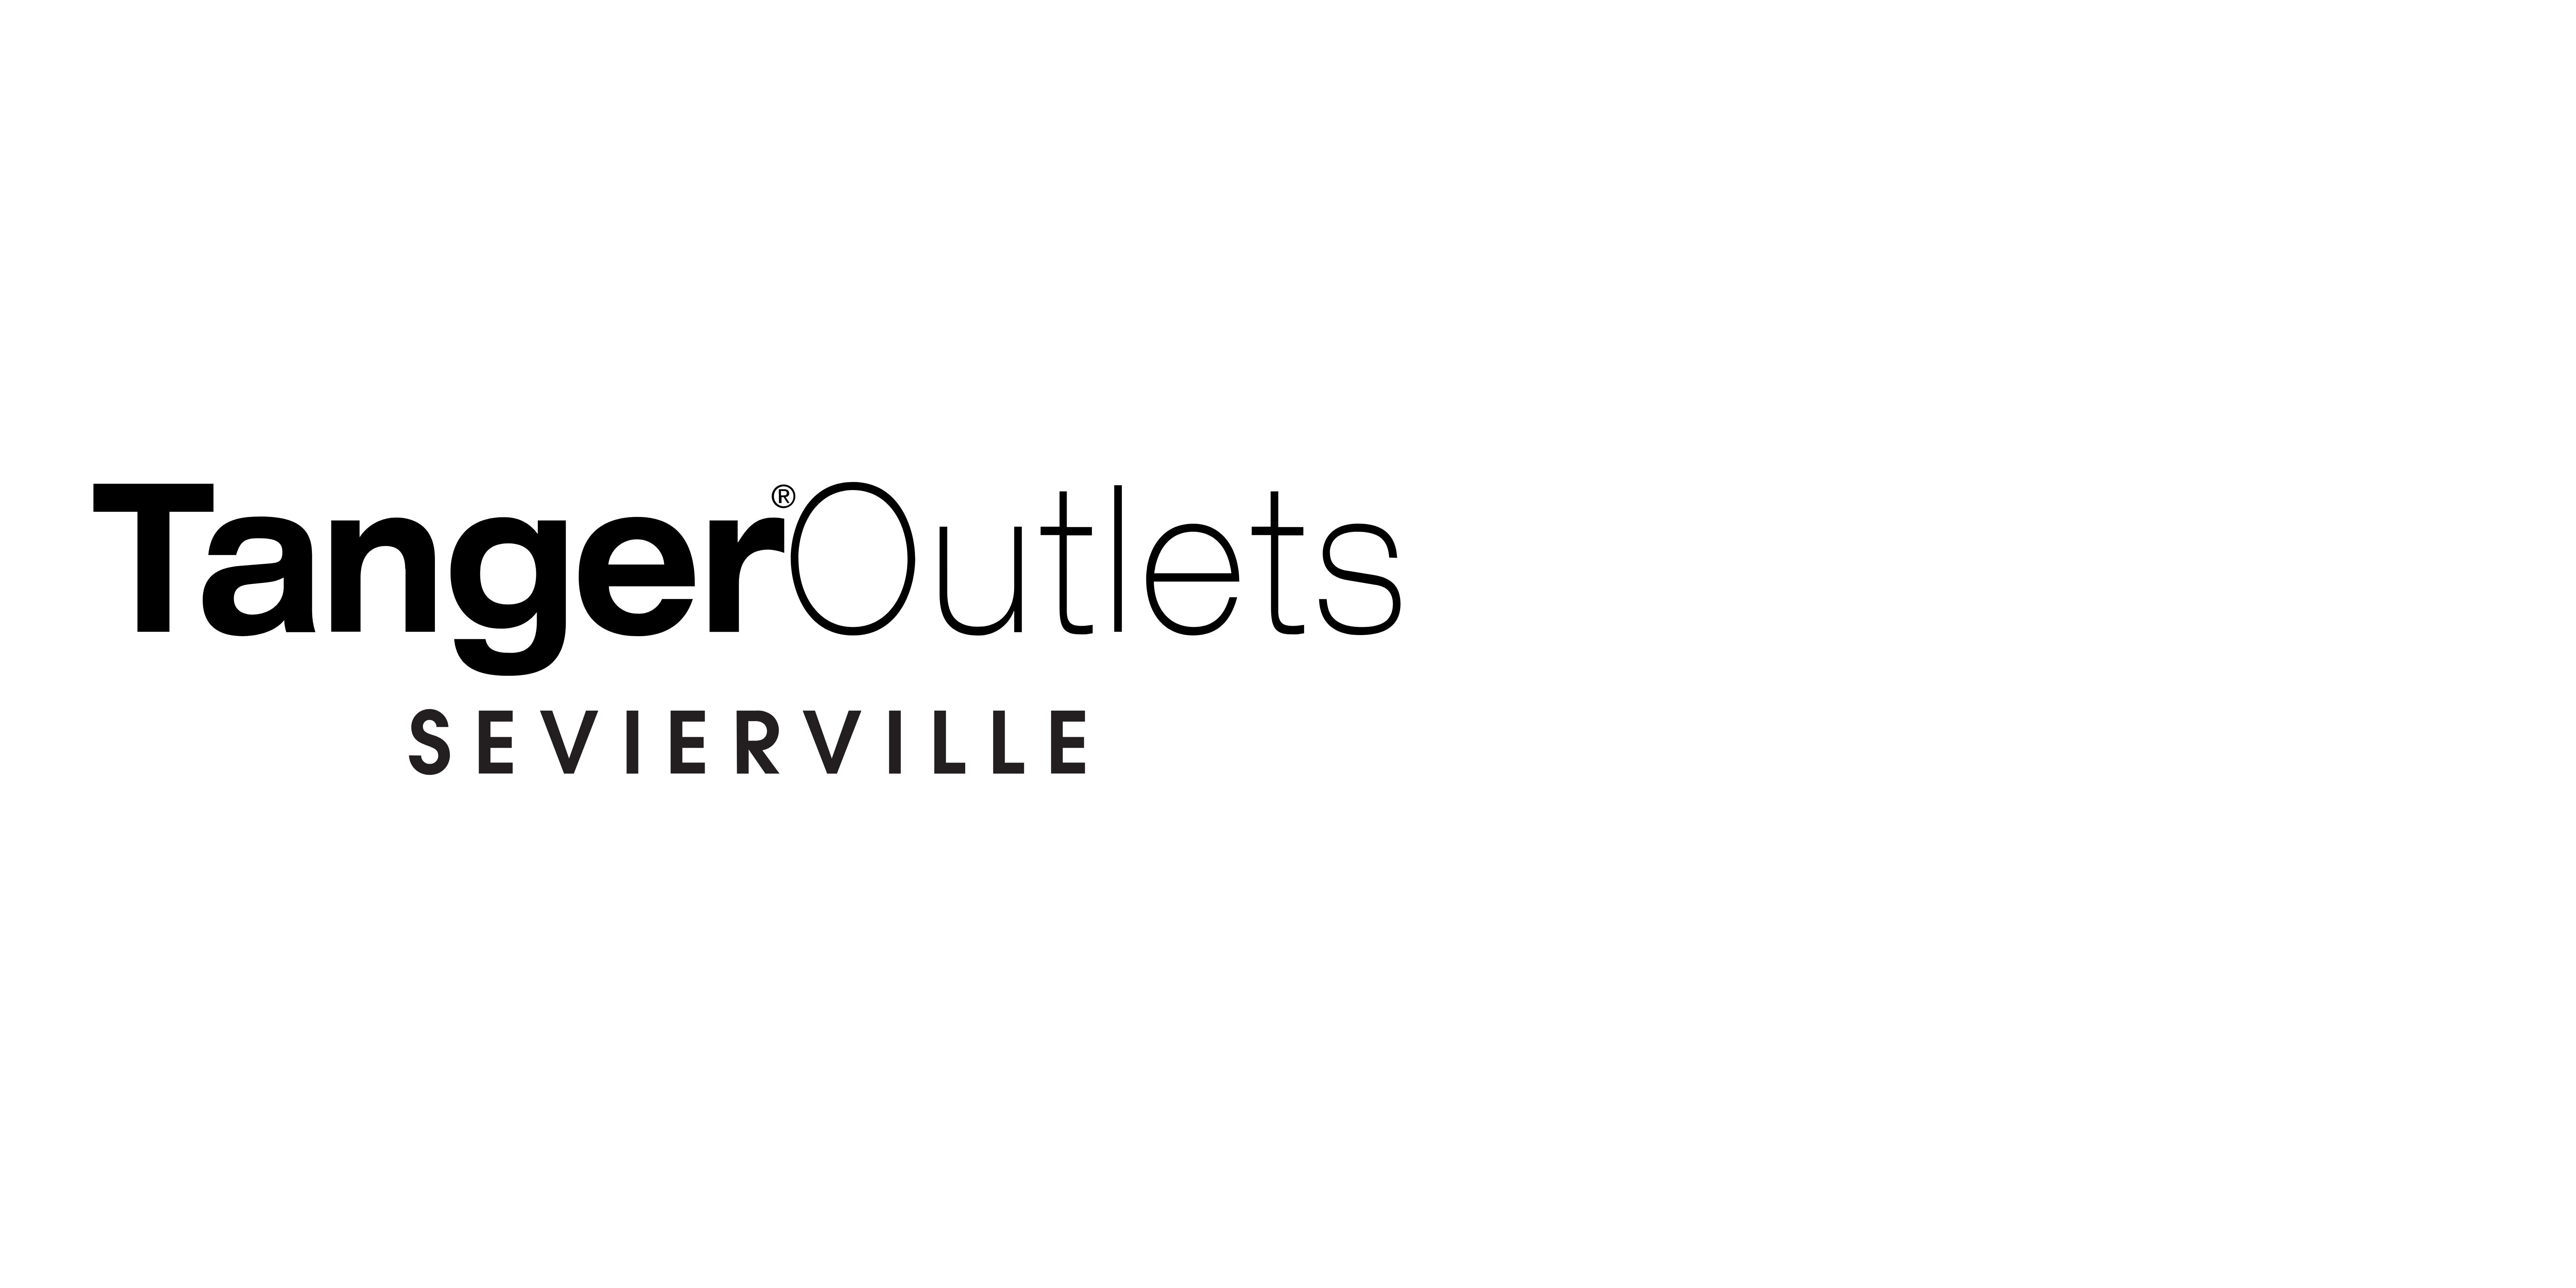 Tanger Outlets Sevierville Announces 2022 Black Friday Weekend Hours